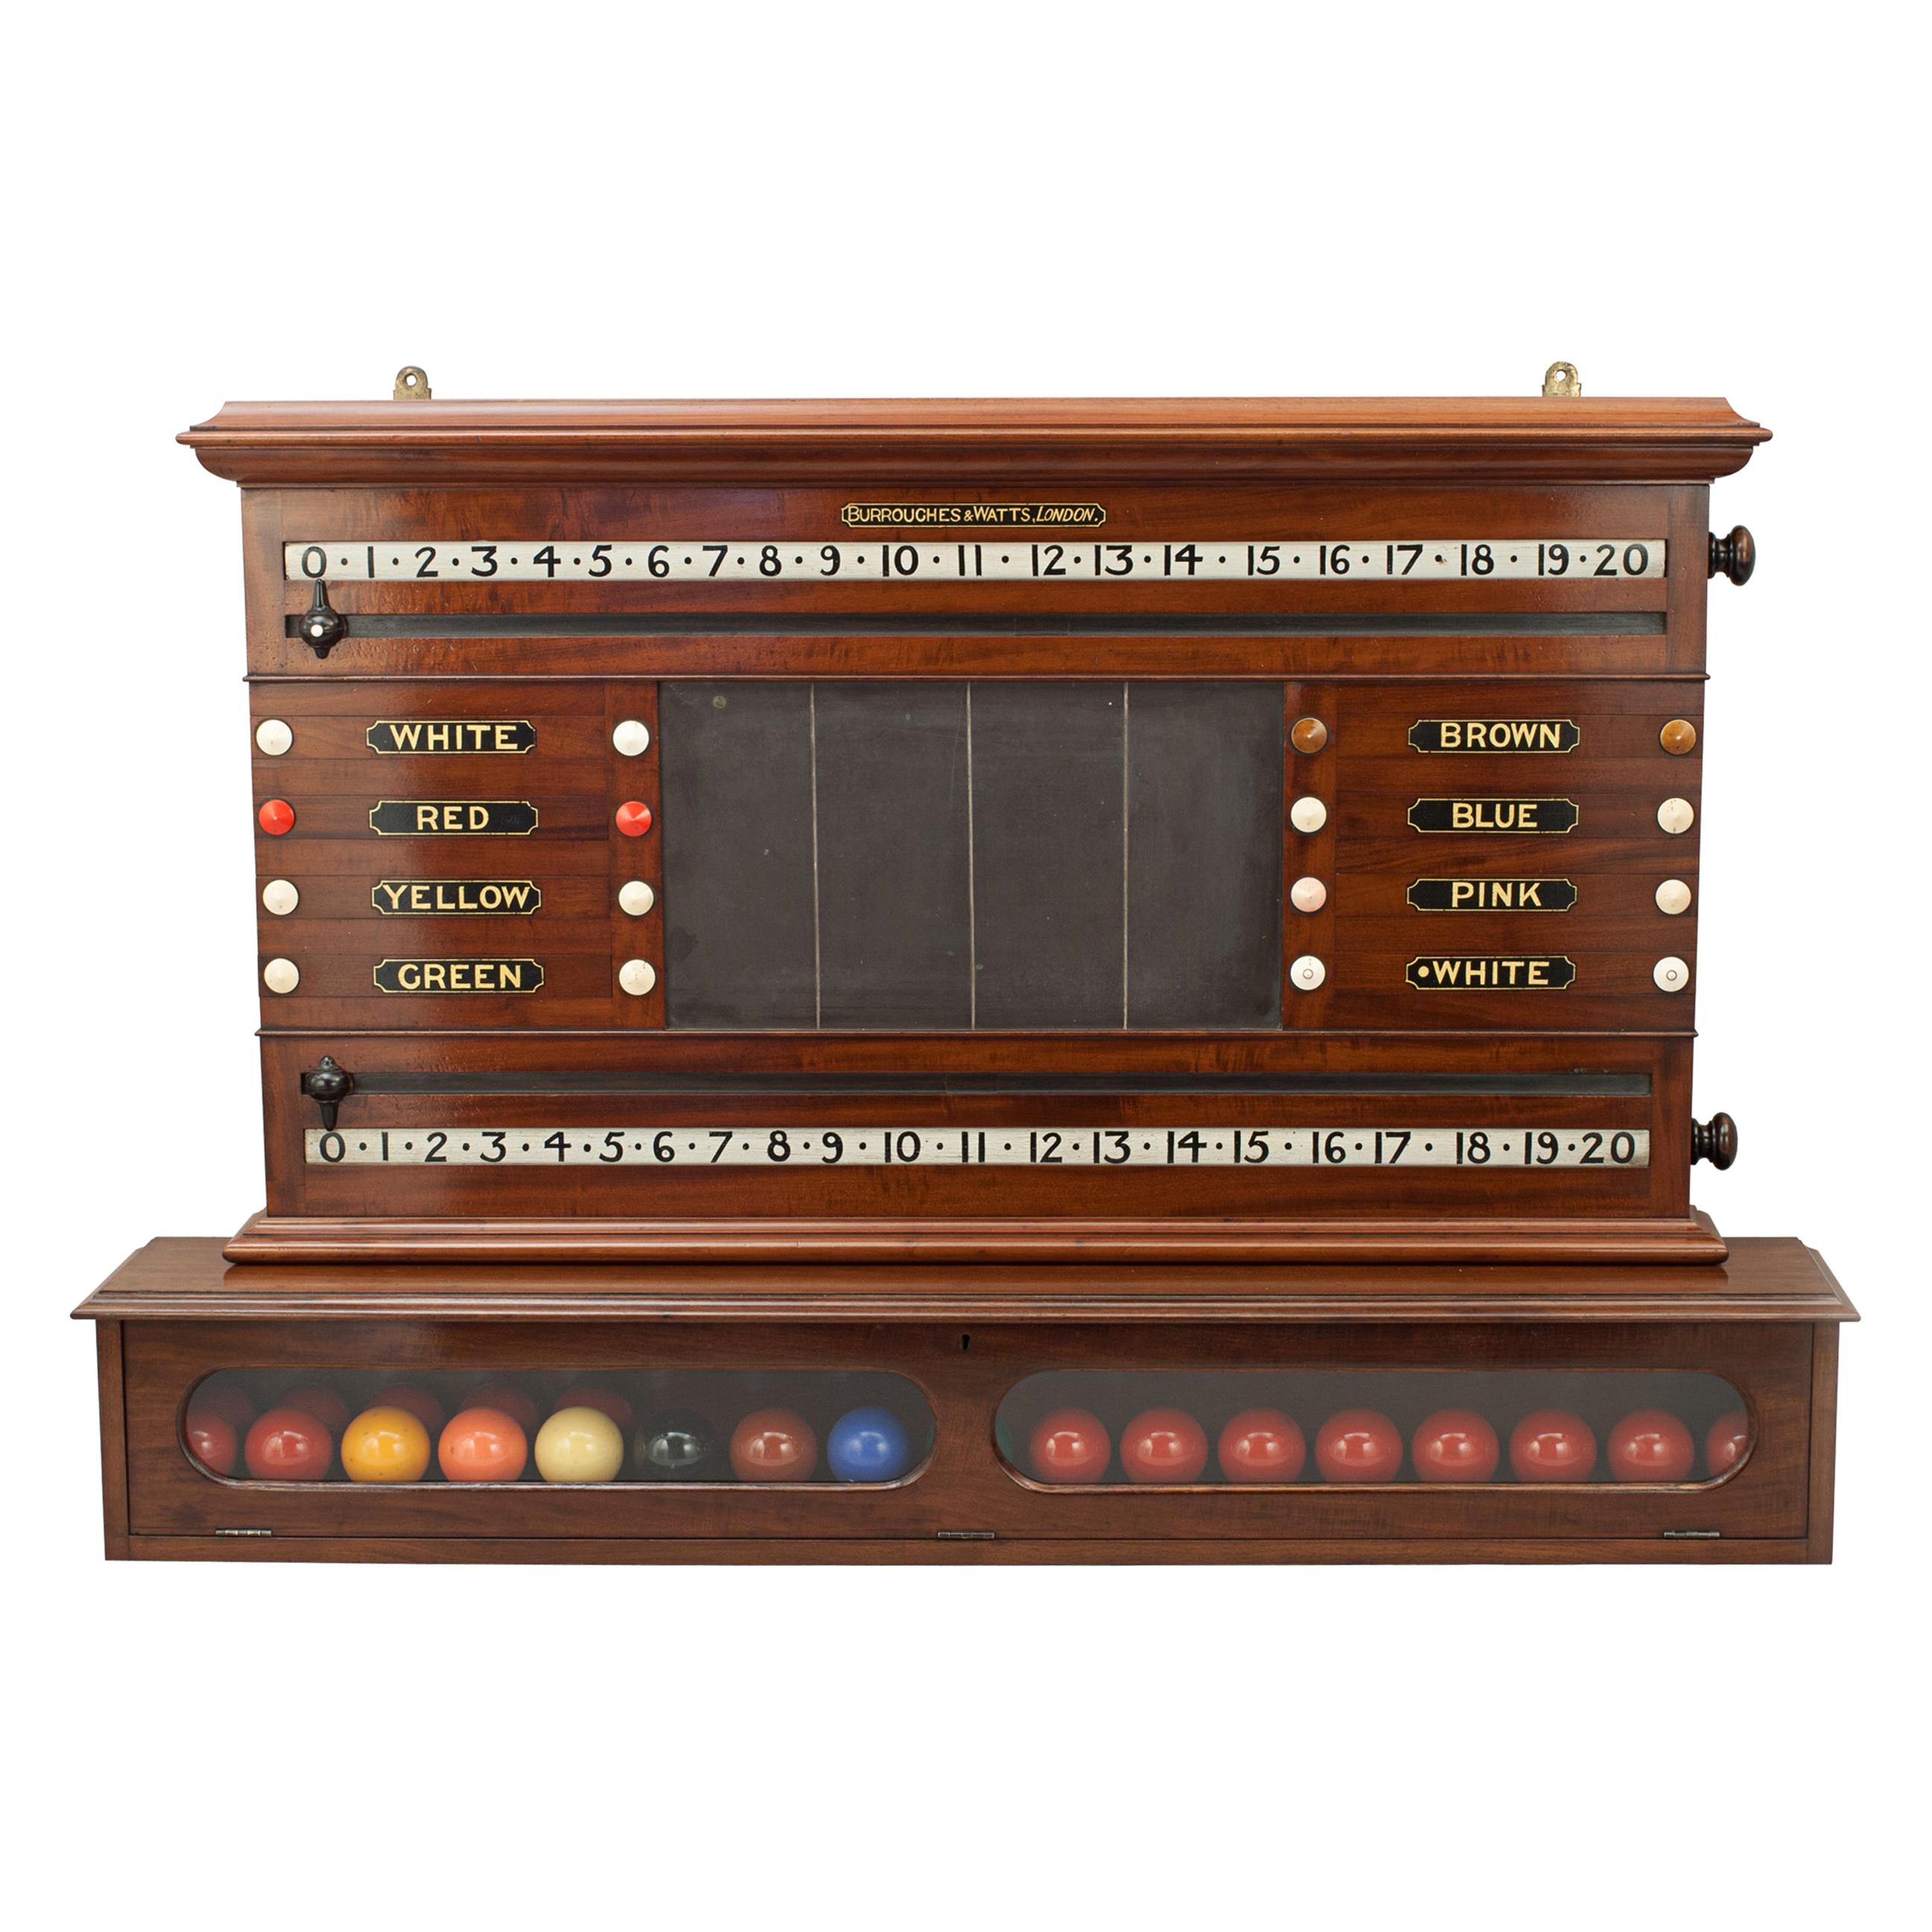 Burroughes & Watts Snooker Score Board With Life Pool and Ball Compartment Cabin